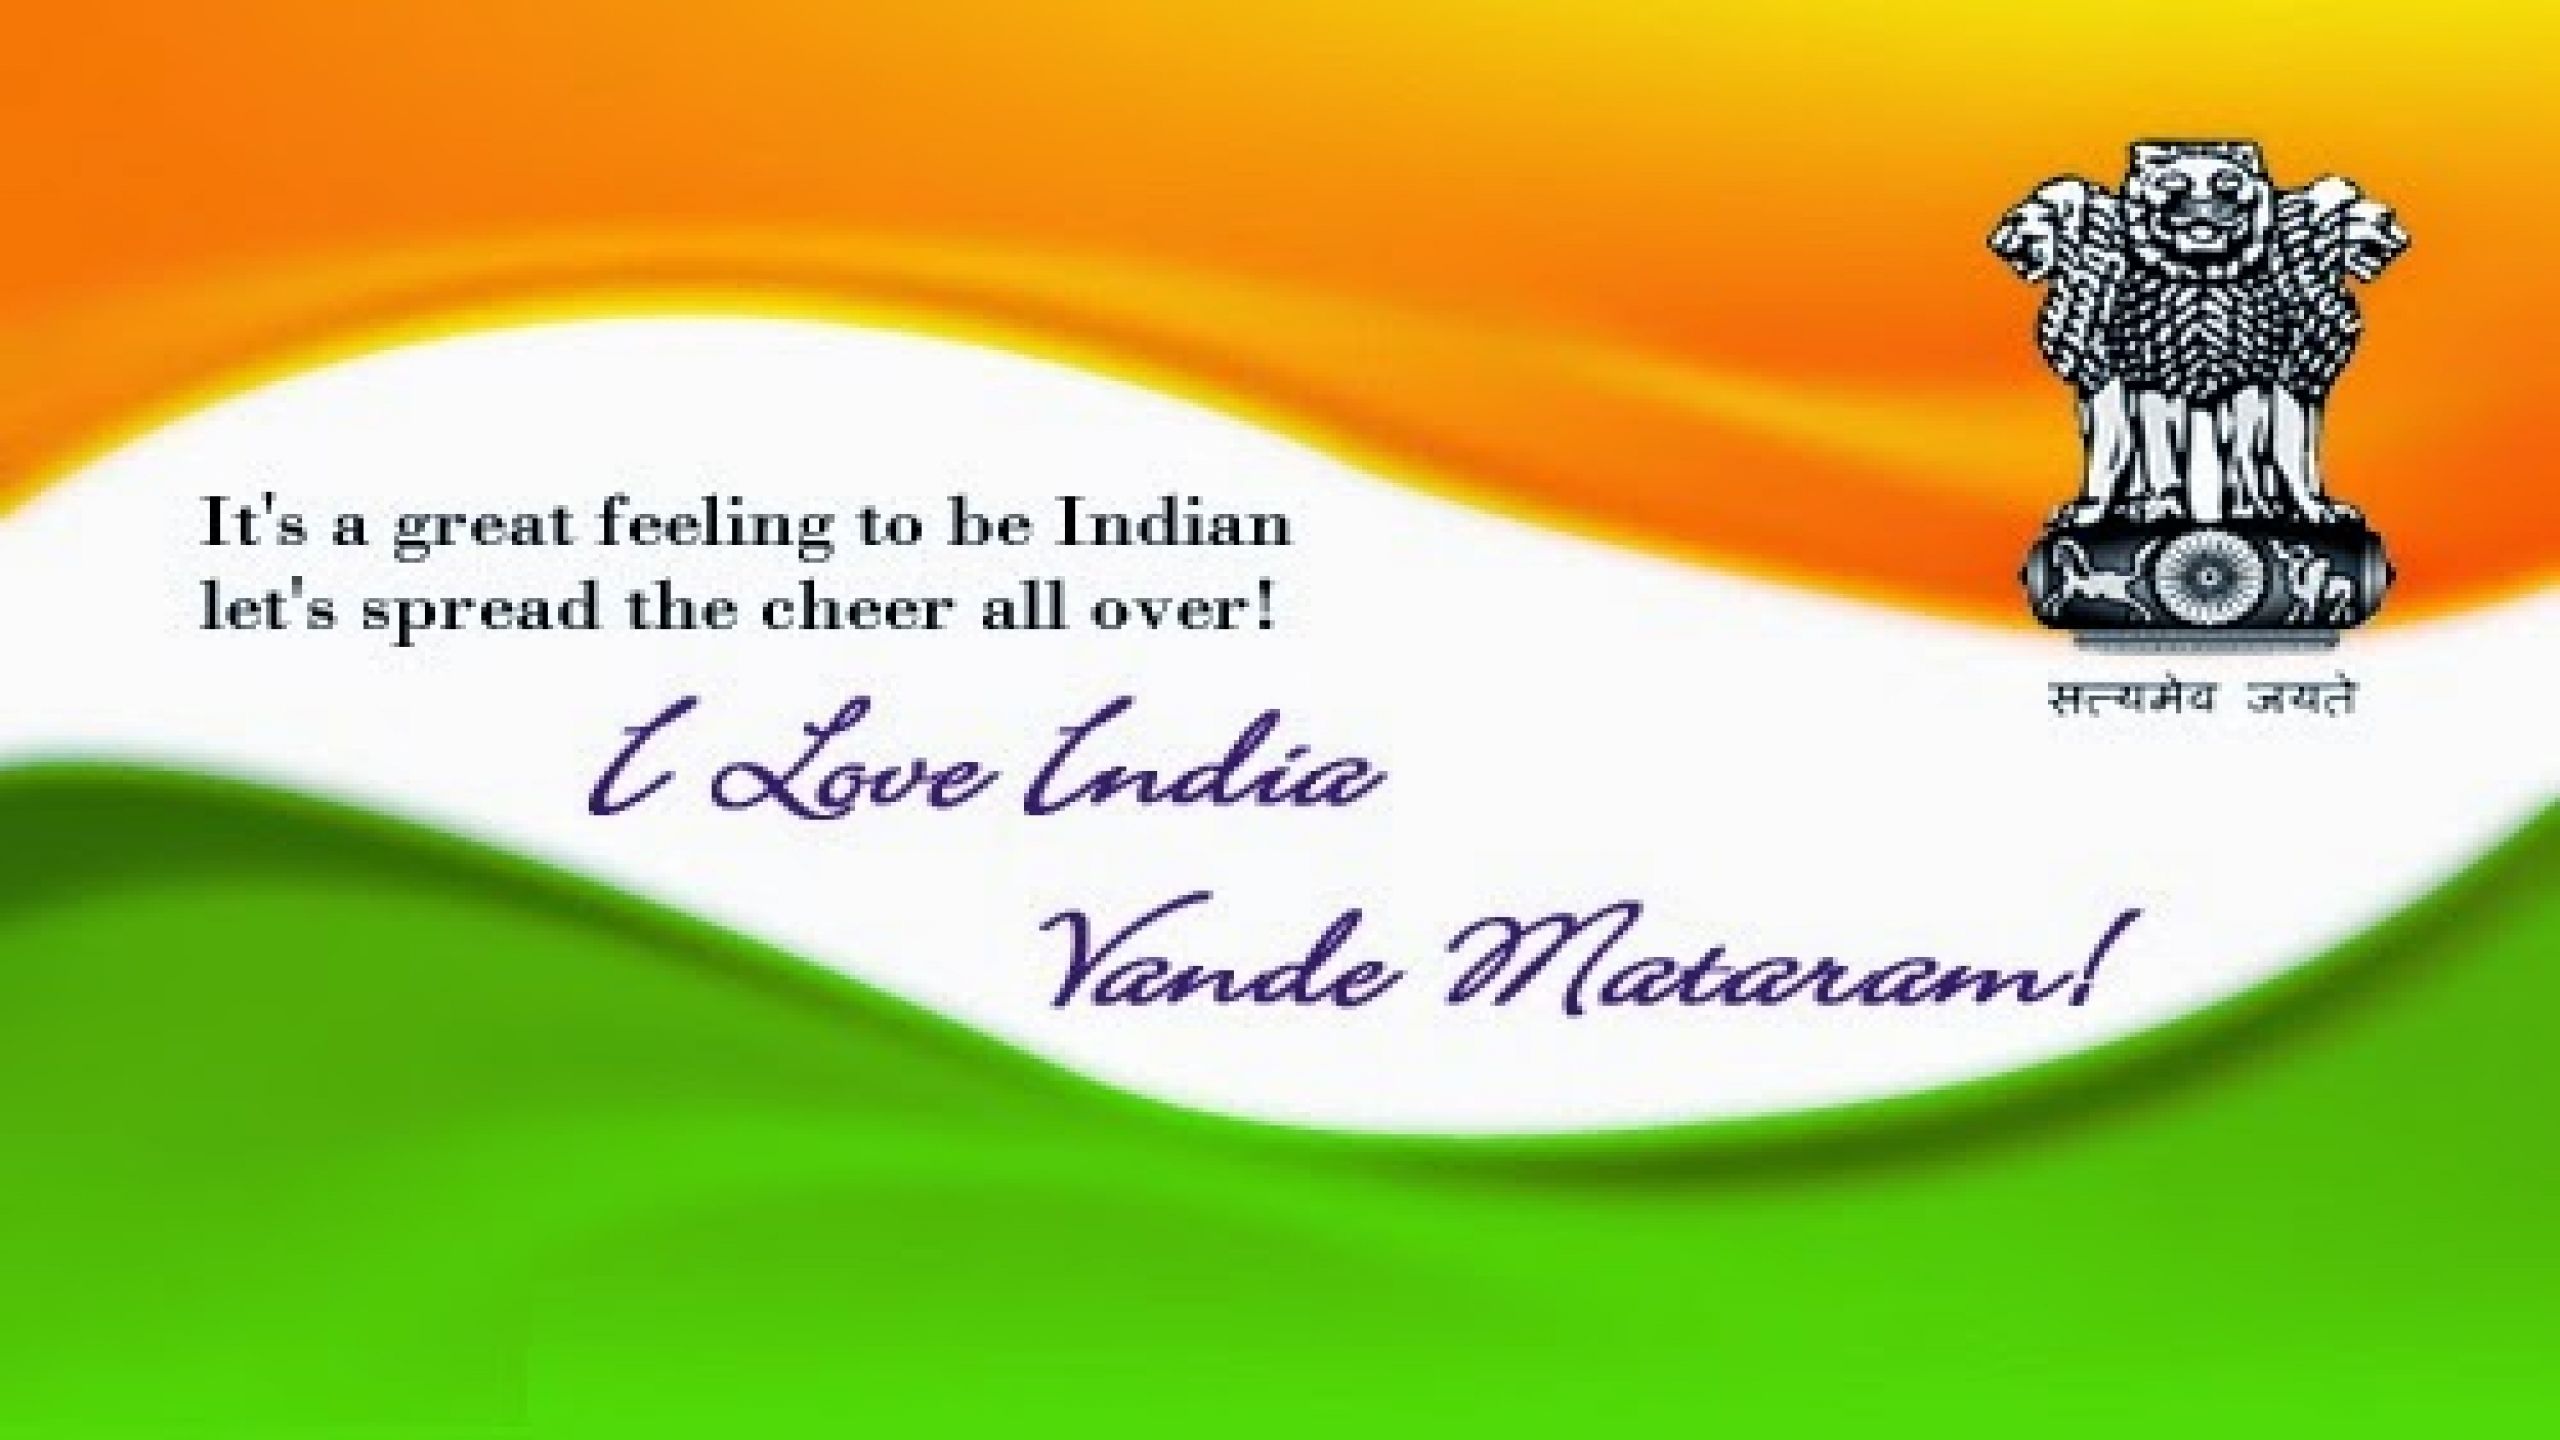 India Flag Wallpapers Love India Hd Vande Mataram - Independence Day India 2018 , HD Wallpaper & Backgrounds